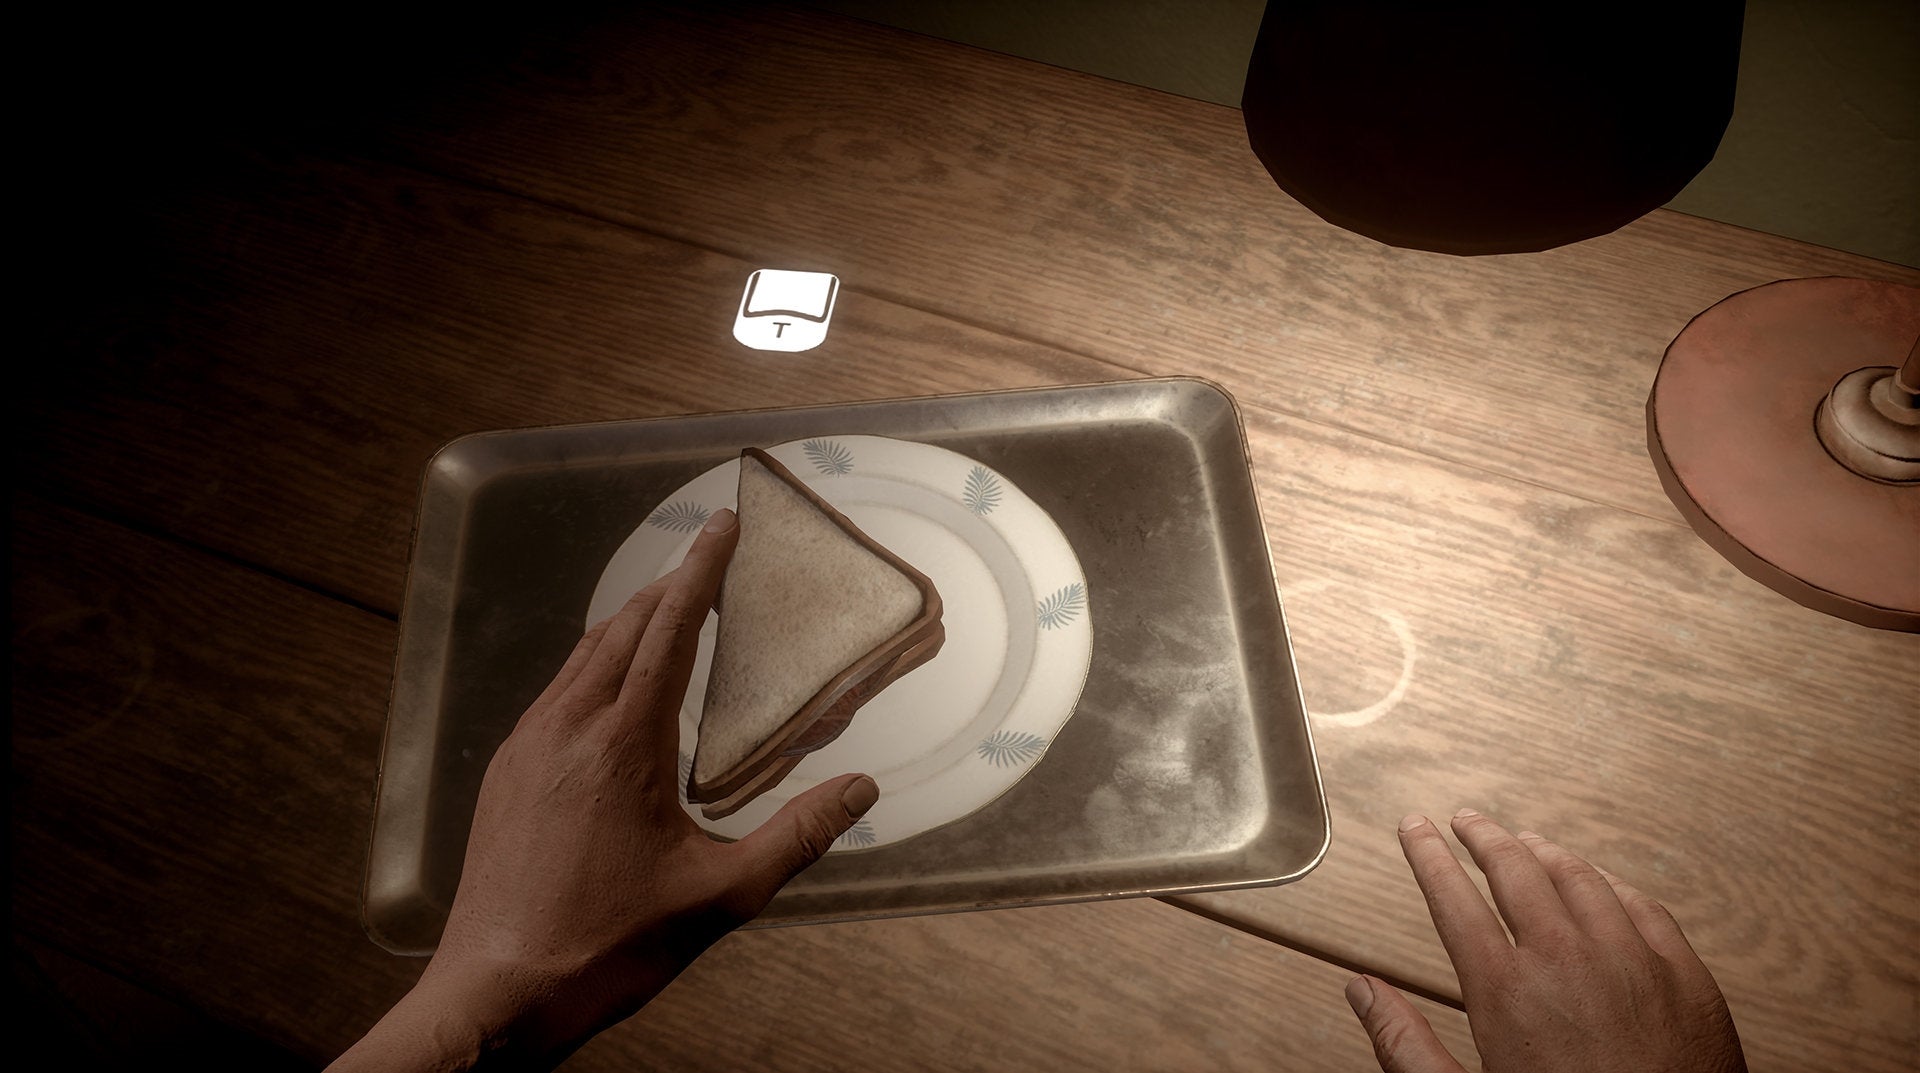 First-person view holding a sandwich over a plate in a game scene.